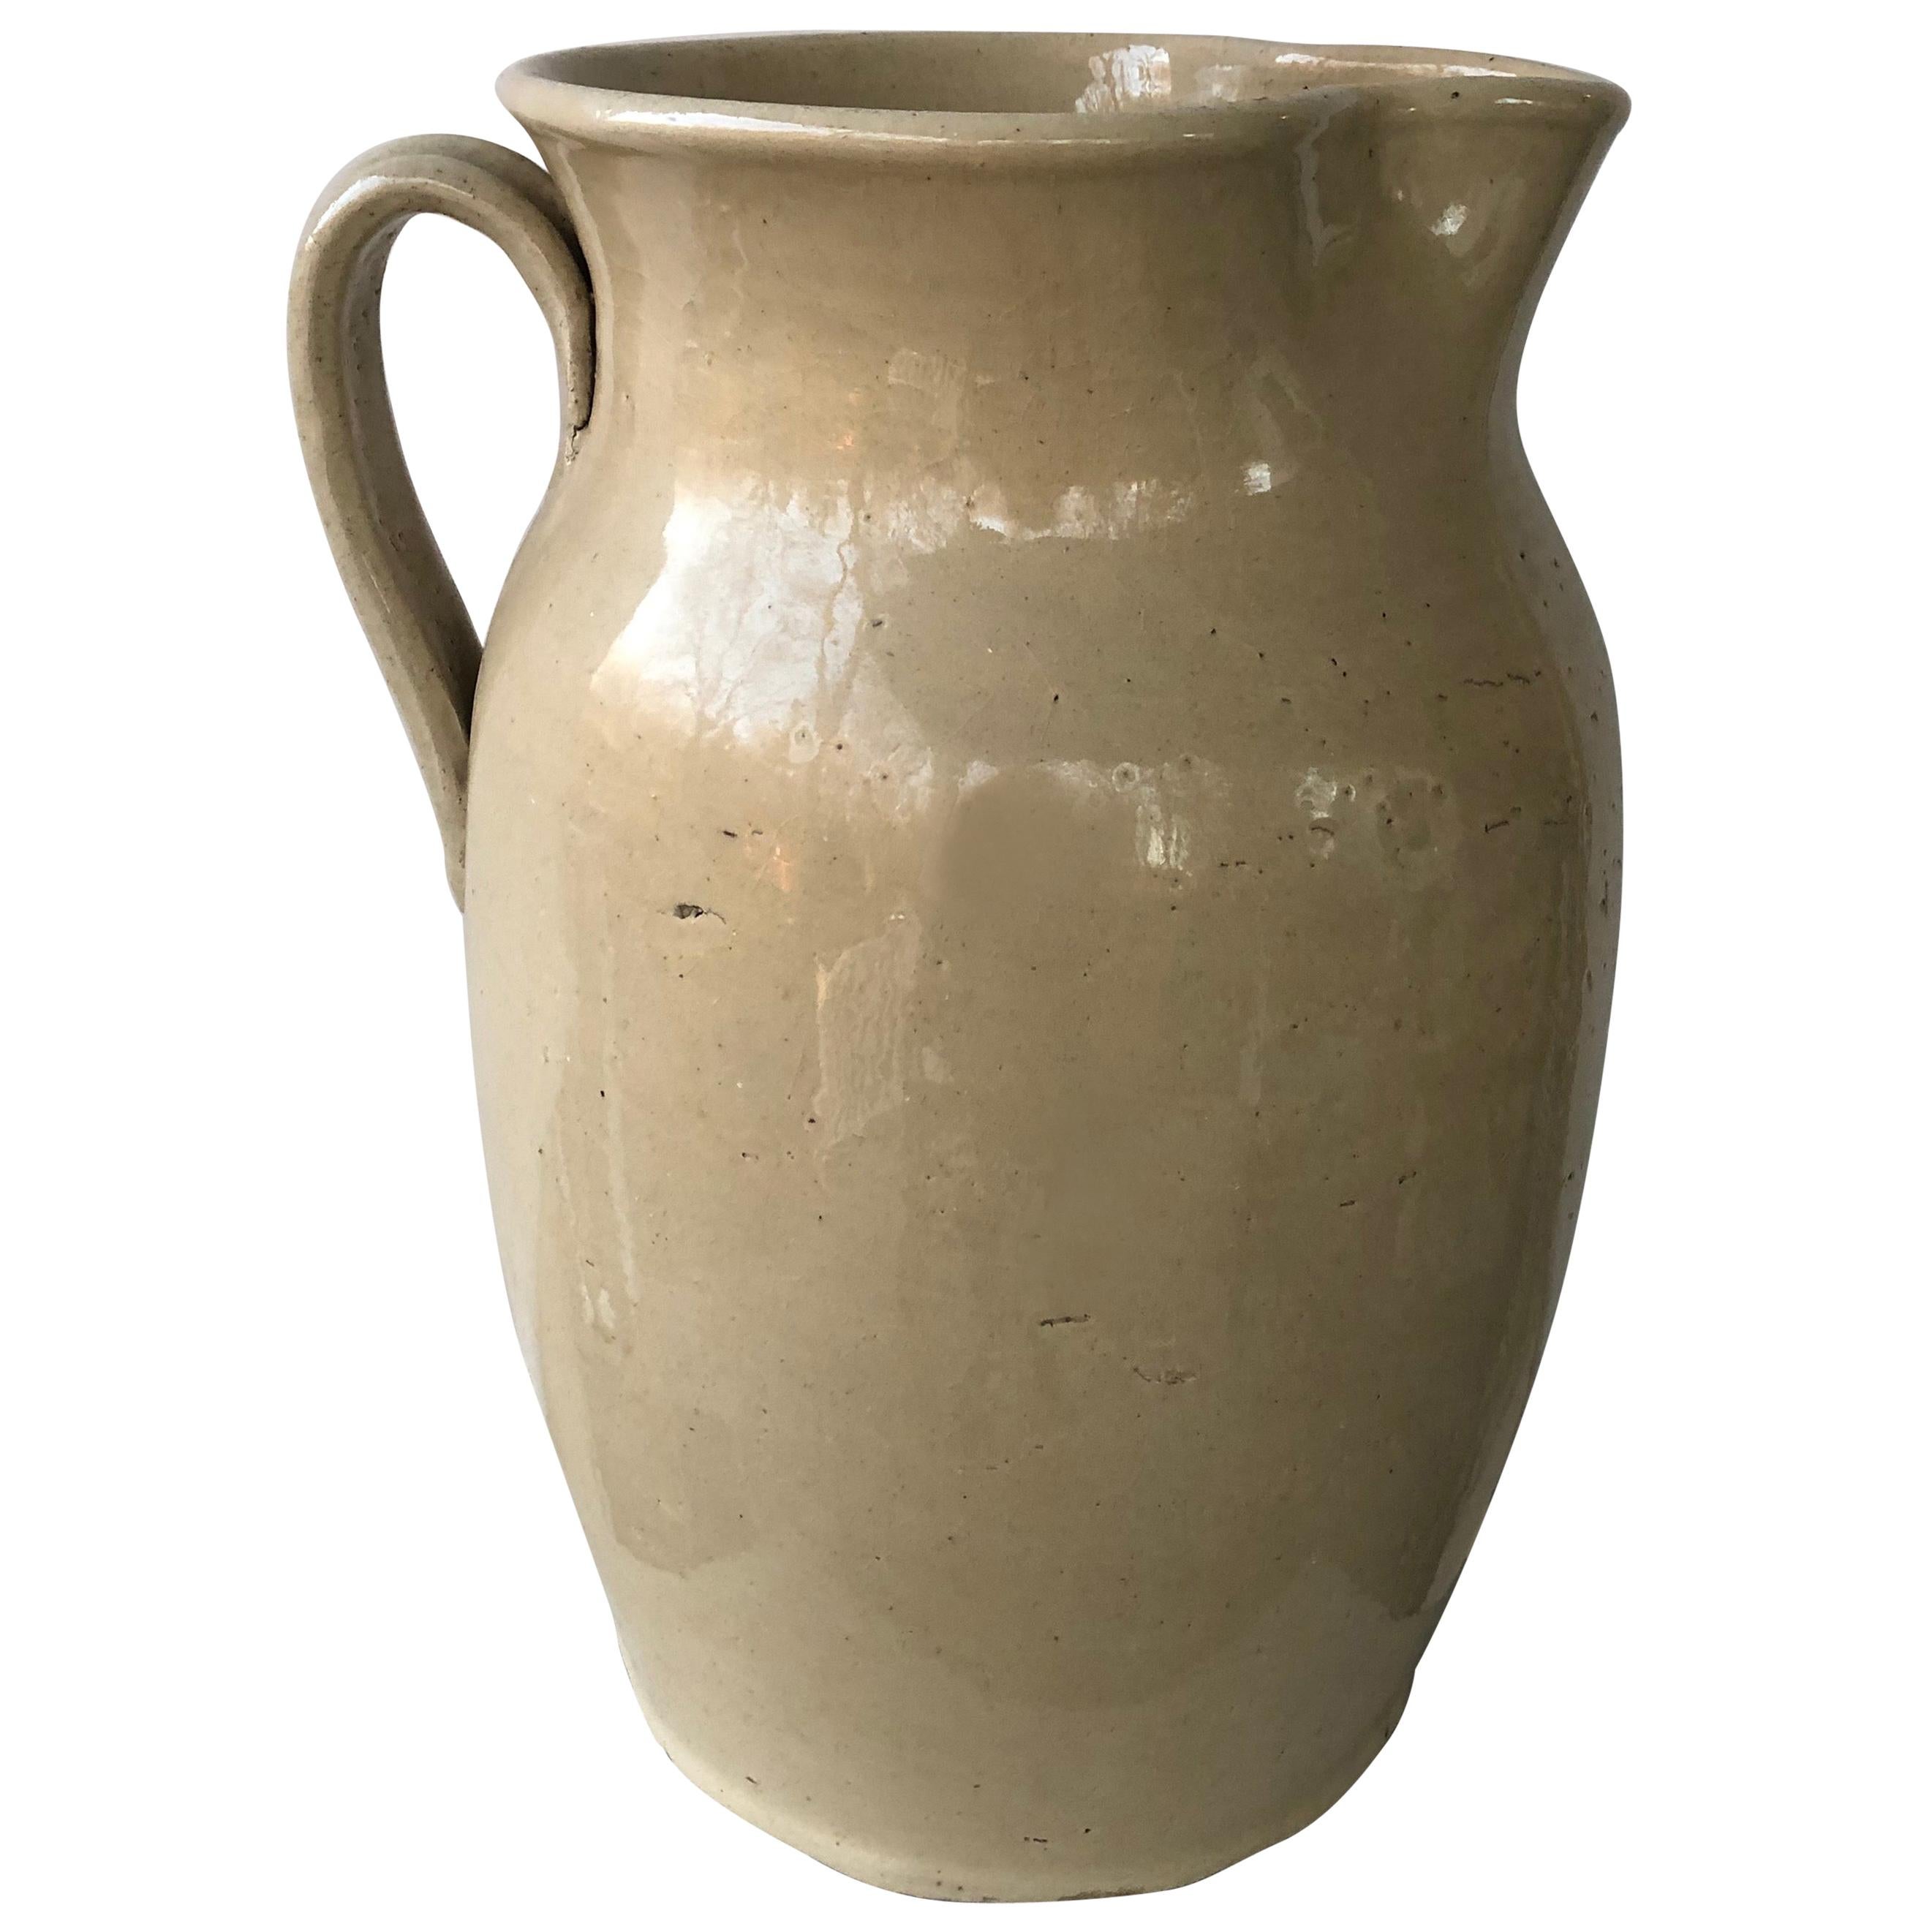 Enormous Cream Glazed English Pottery Pitcher For Sale